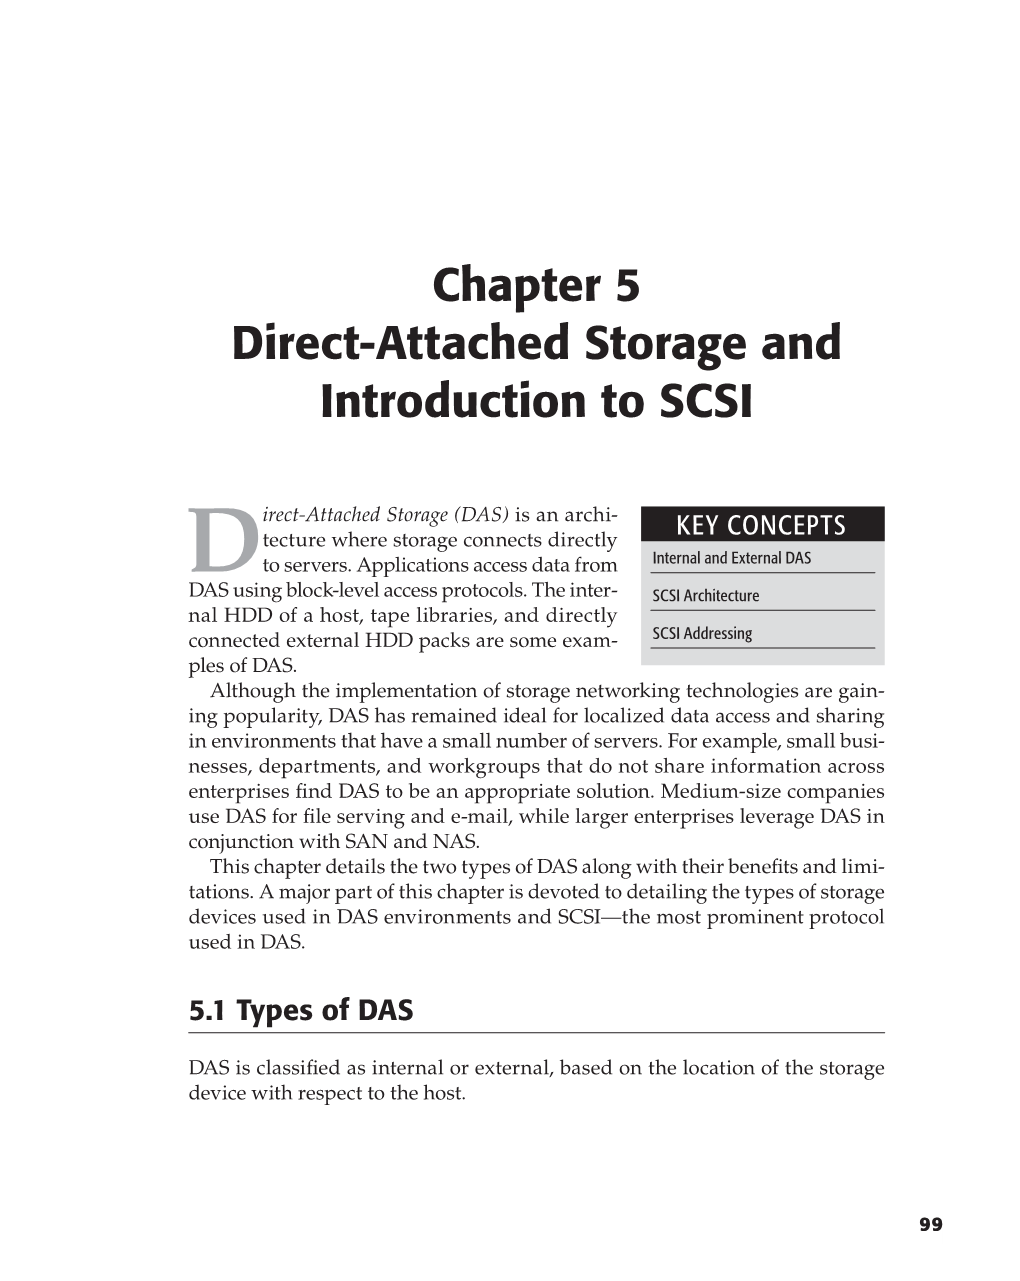 Chapter 5 Direct-Attached Storage and Introduction to SCSI